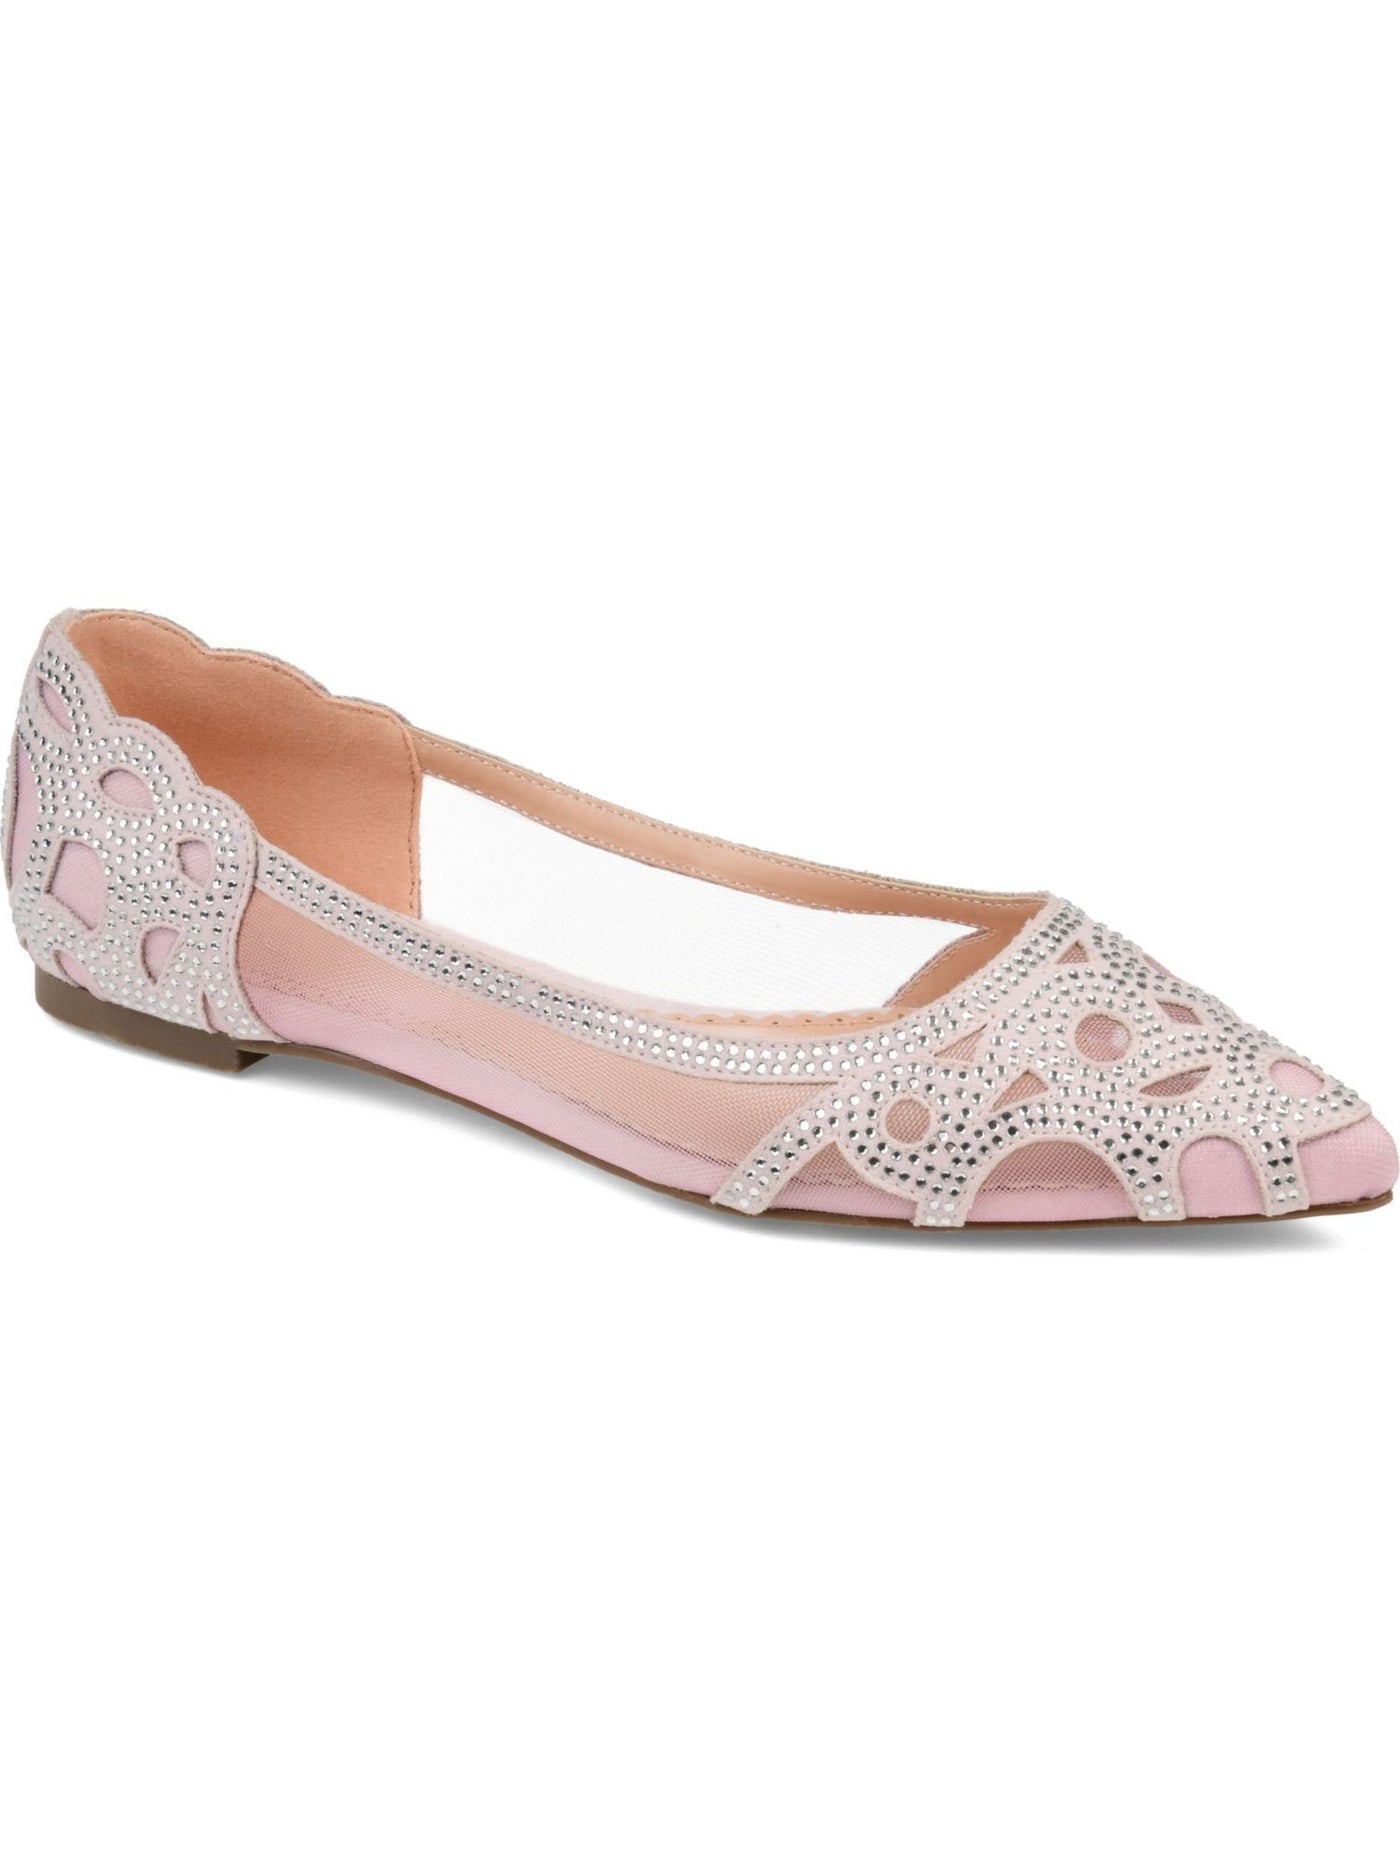 JOURNEE COLLECTION Womens Pink Mesh Insets Embellished Padded Batavia Pointed Toe Slip On Ballet Flats 9 M